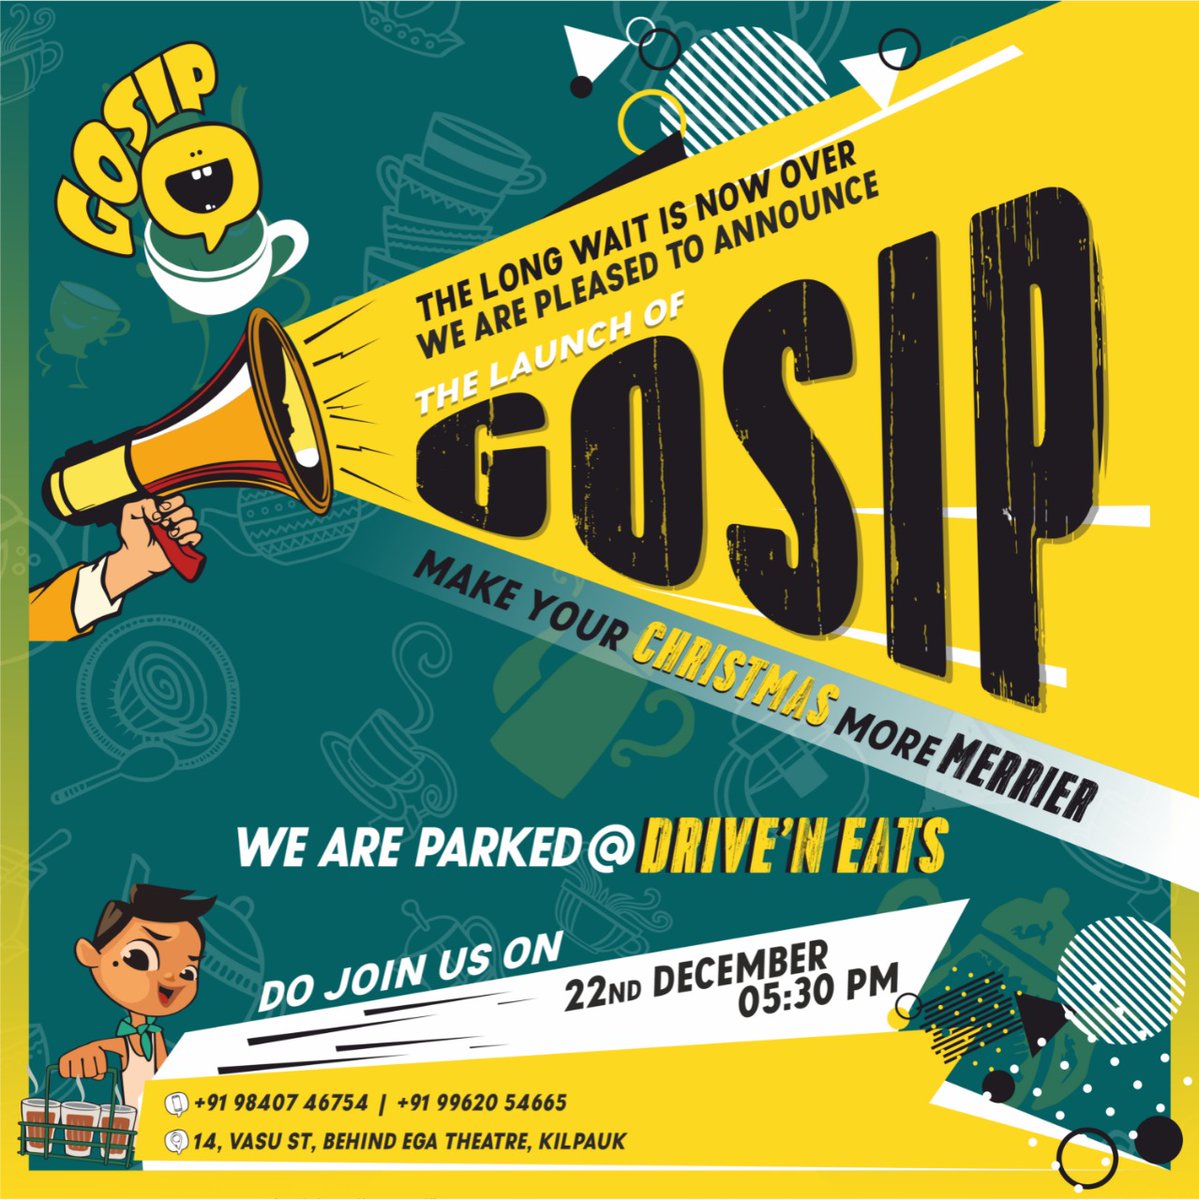 We invite you all for the launch of GOSIP on 22nd December @ 5.30PM Onwards !!

#launch #brand #branding #gosipchennai #chennai #chennaifoodie #chennaifoodblogger #wherechennaieats #foodporn #instafood #picoftheday #chennaidiaries #foodtalkindia #kilpaukfoodie #gosip